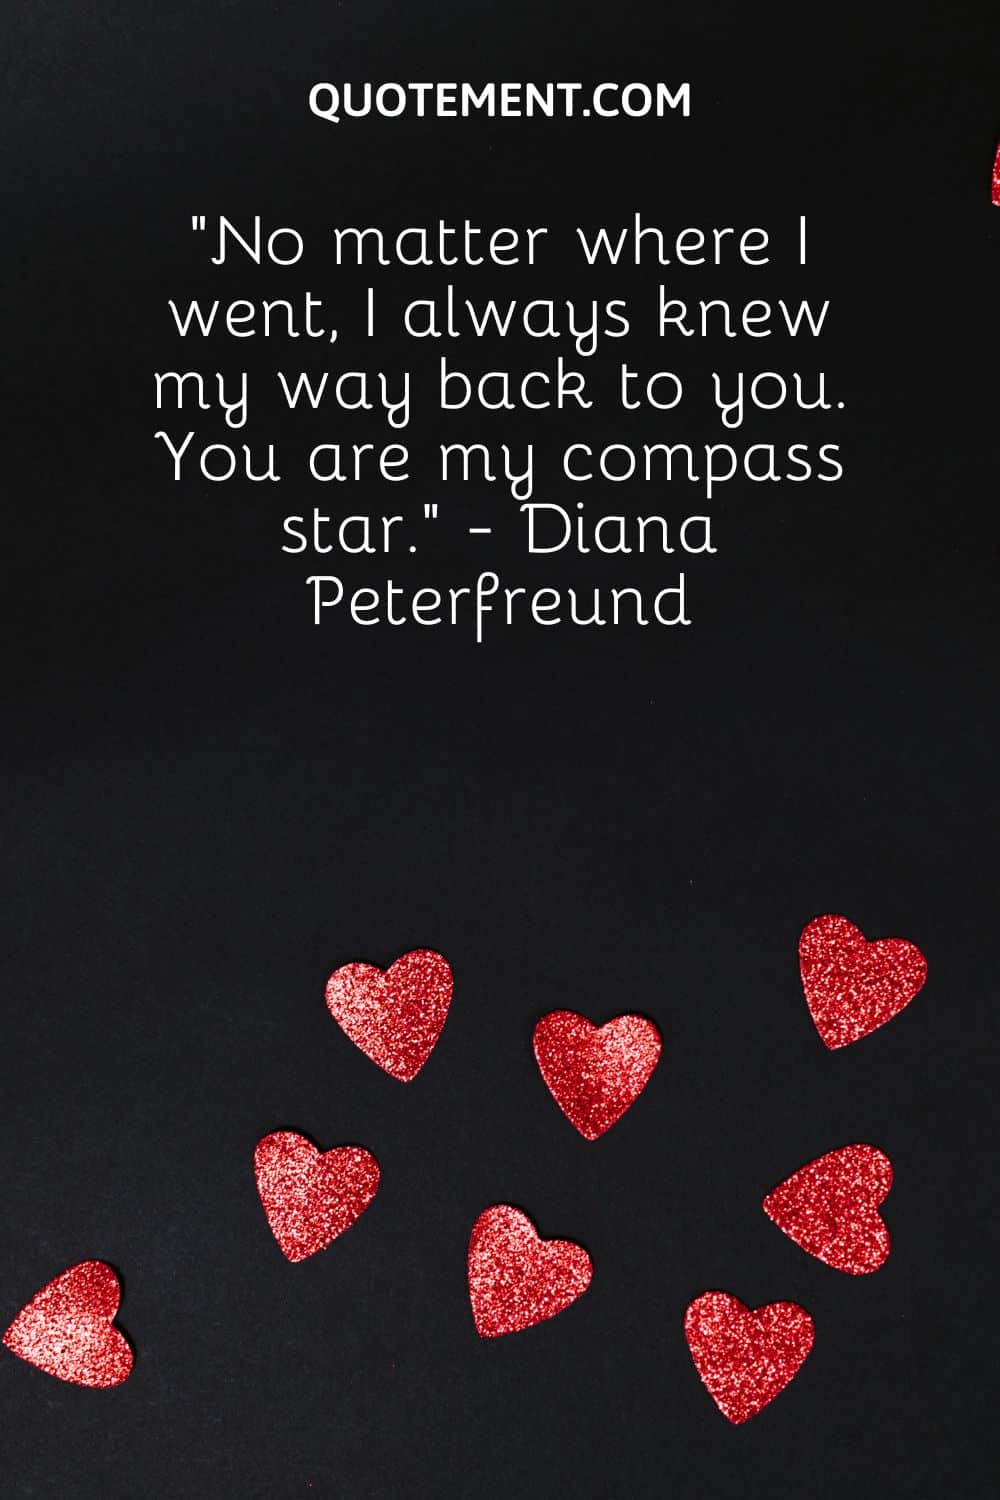 “No matter where I went, I always knew my way back to you. You are my compass star.” - Diana Peterfreund